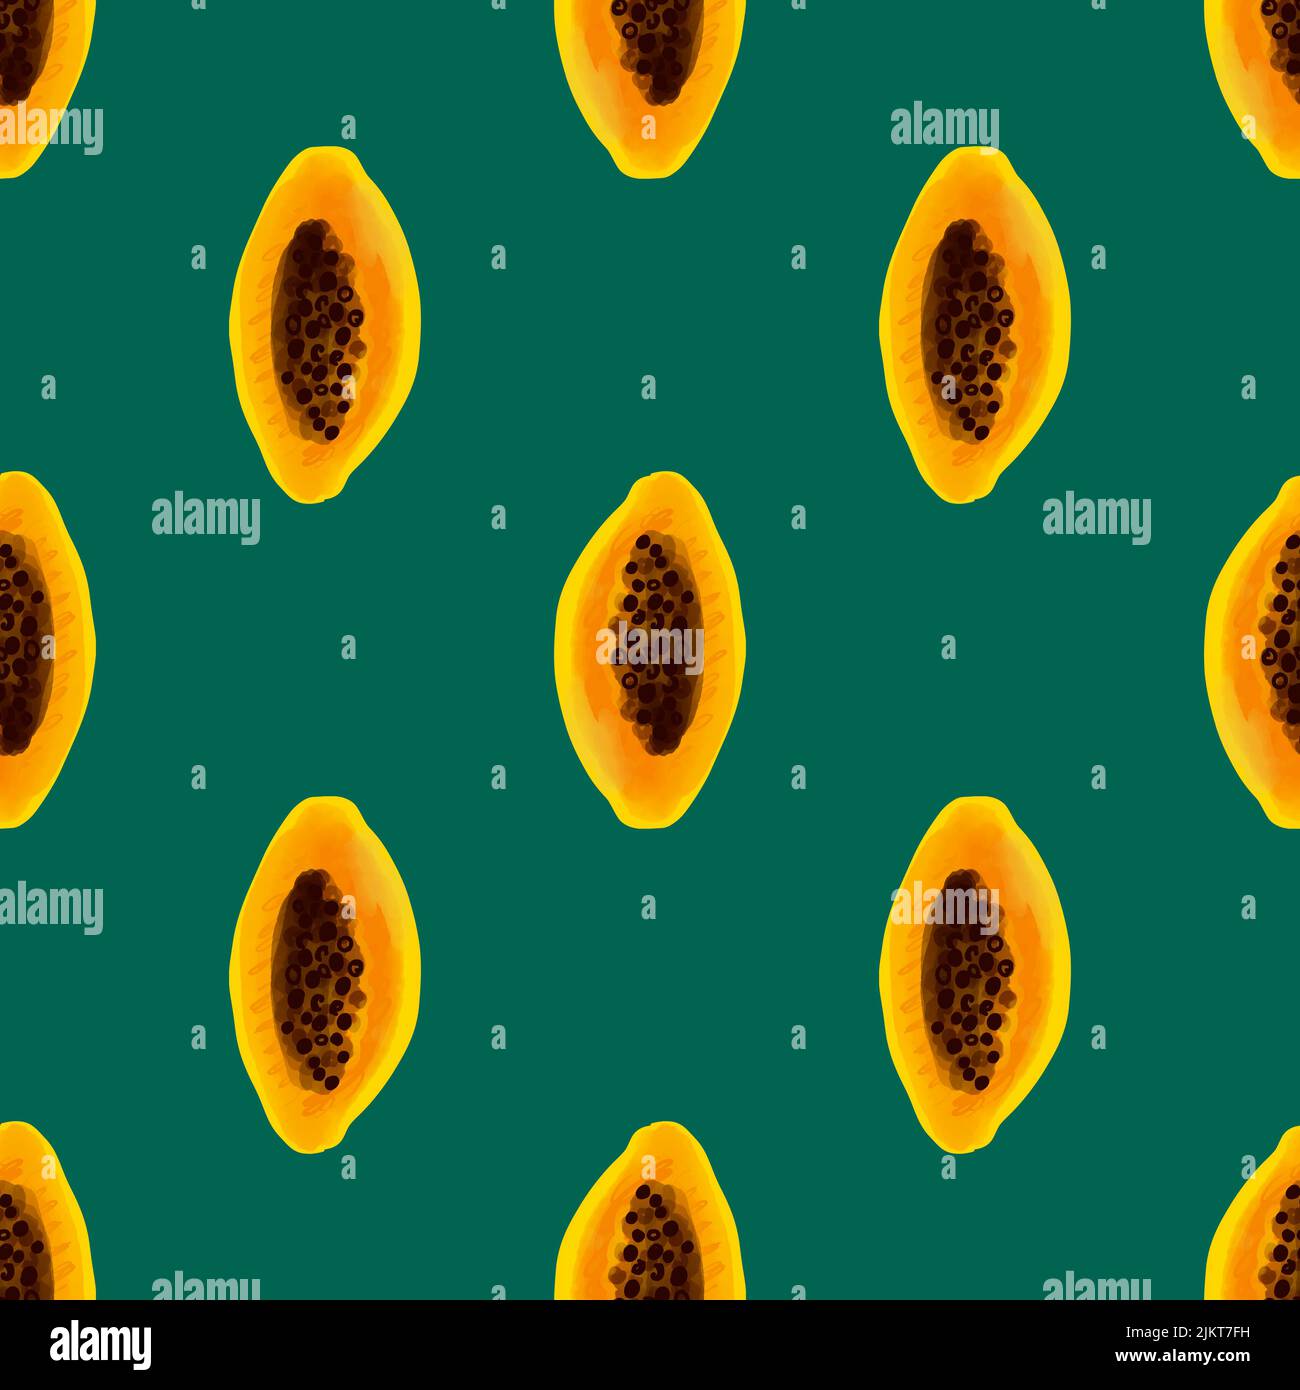 Seamless pattern with illustration of a papaya fruit on a green background Stock Vector